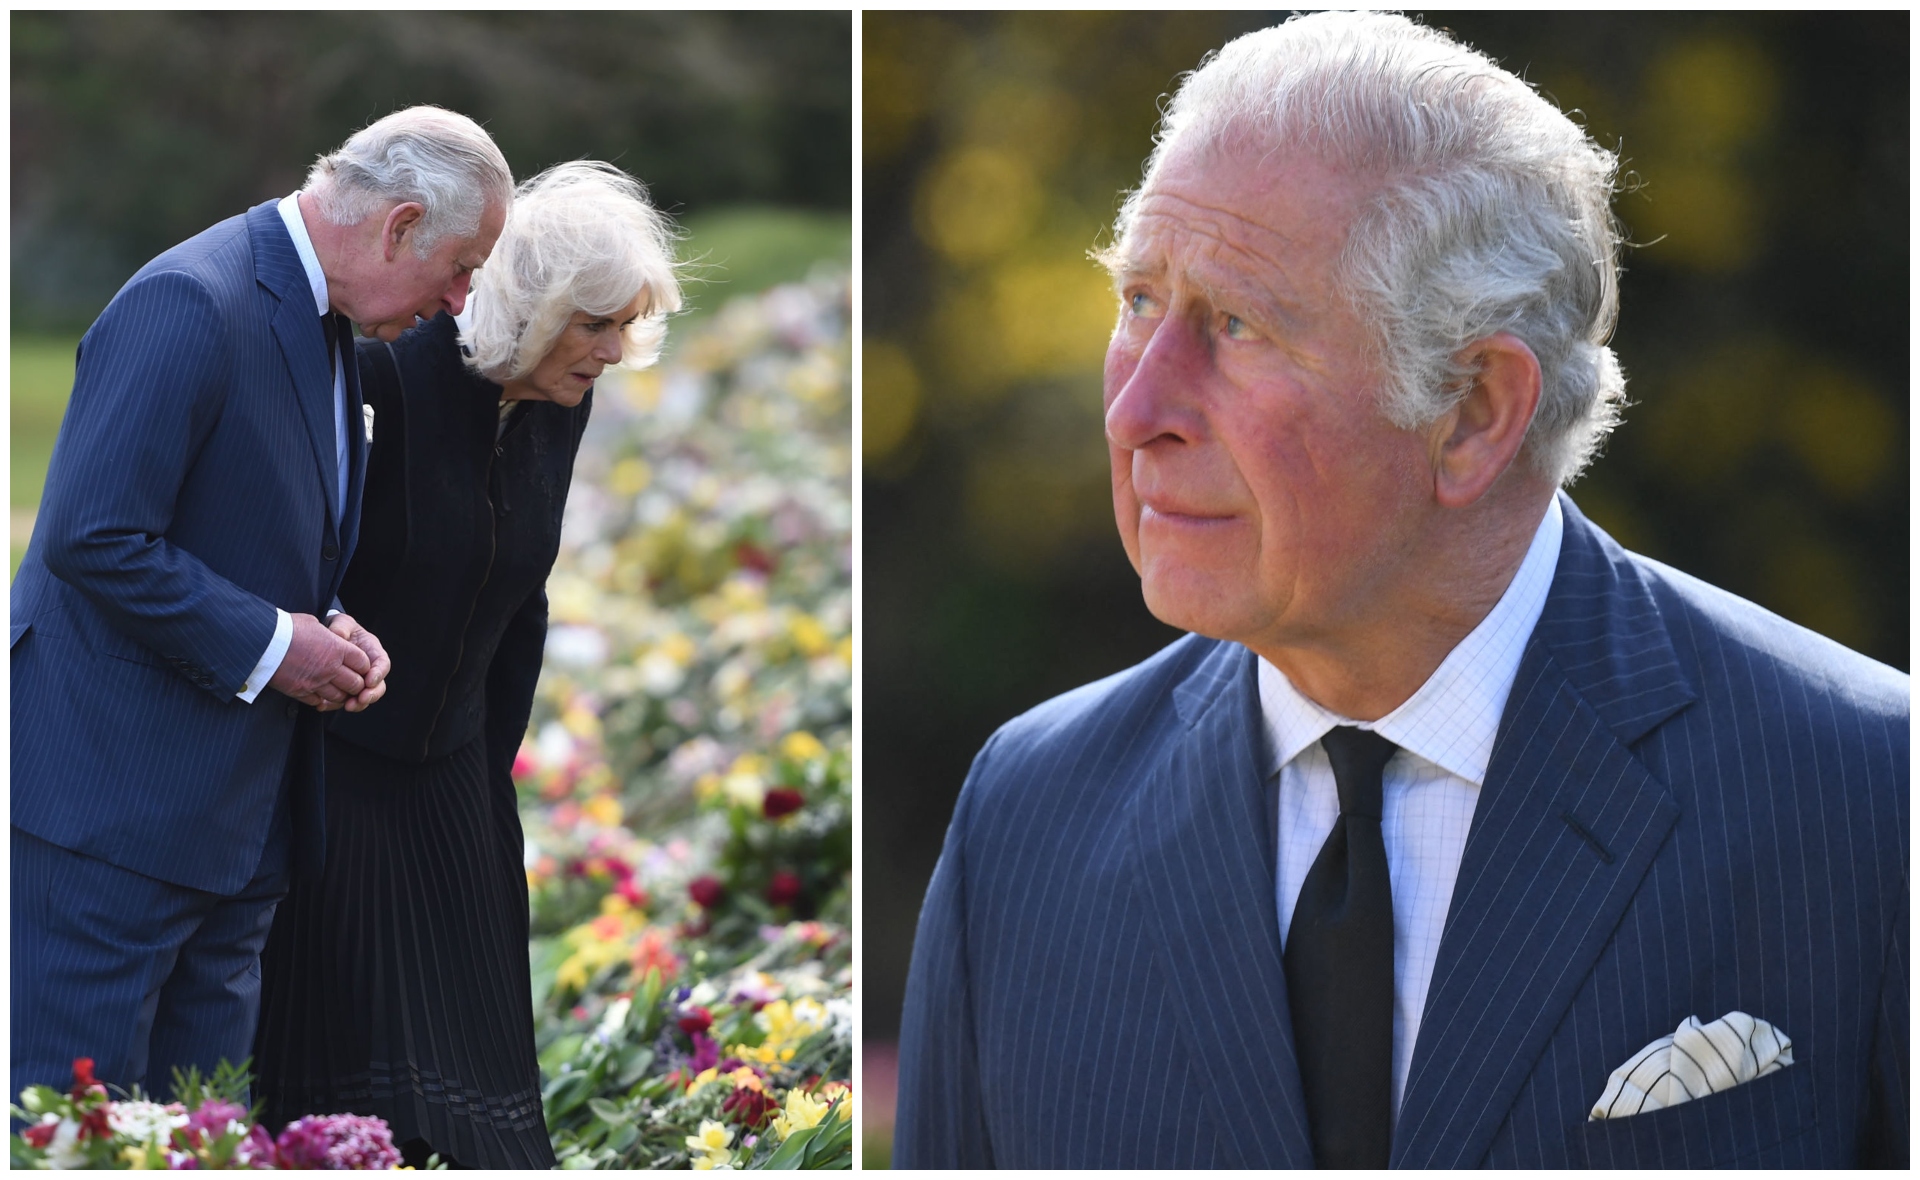 Moving, emotional scenes as Prince Charles steps out in public for the first time since his father’s death